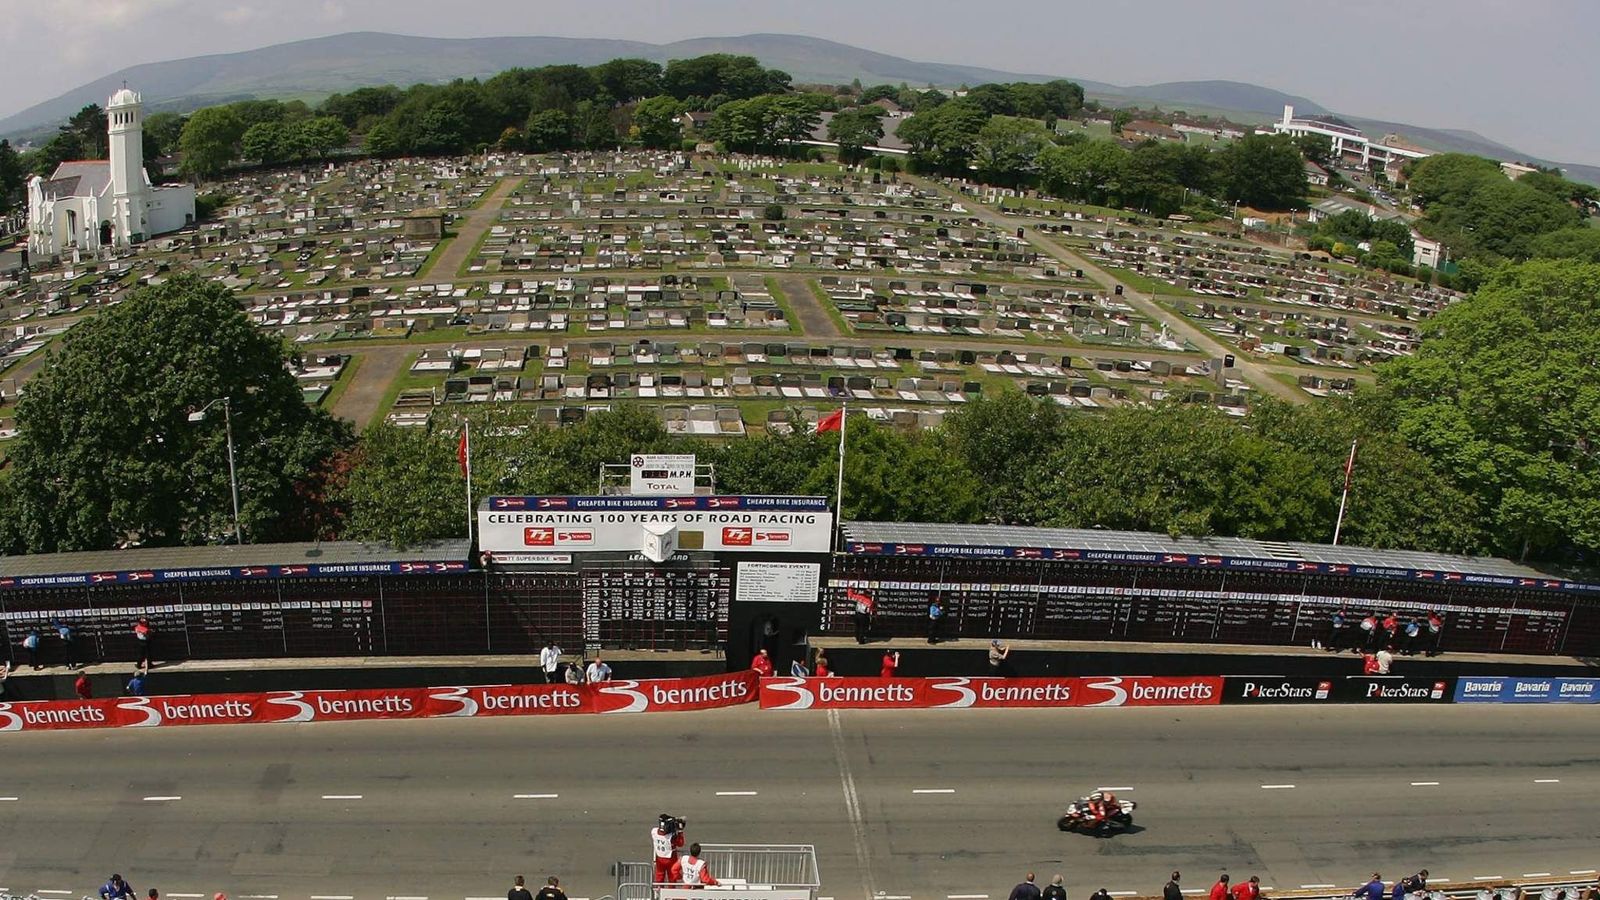 Two More Riders Killed At Isle Of Man TT Races